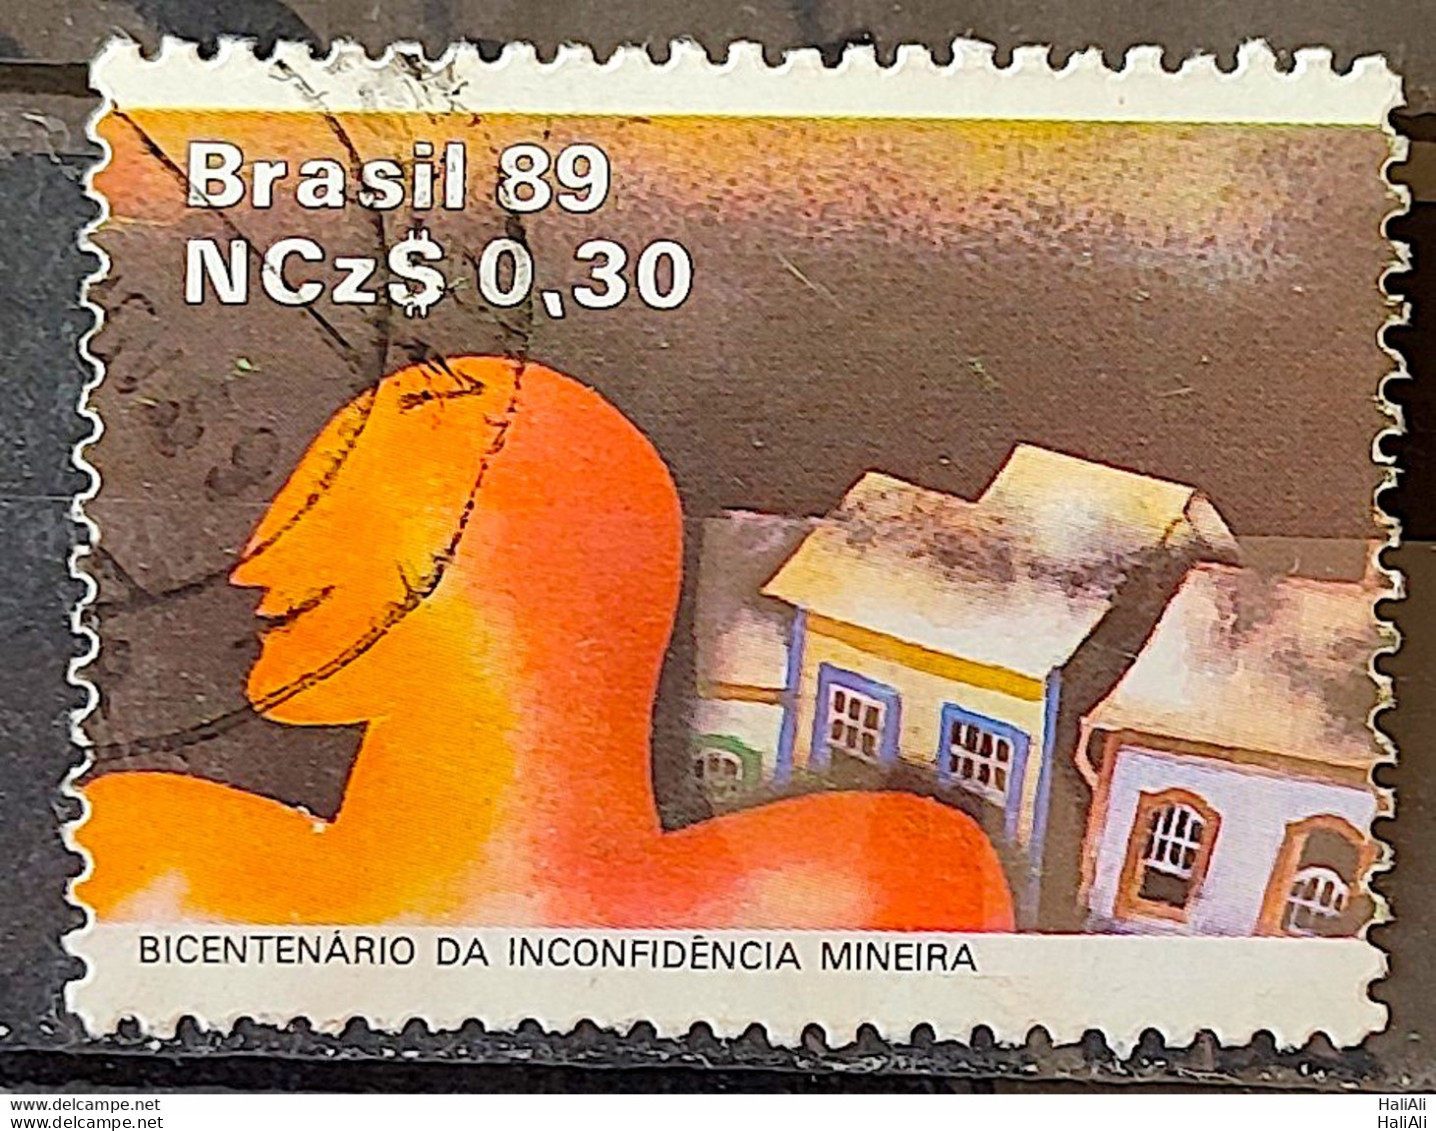 C 1628 Brazil Stamp 200 Years Mining Inconfidence History Church 1989 Circulated 2 - Used Stamps